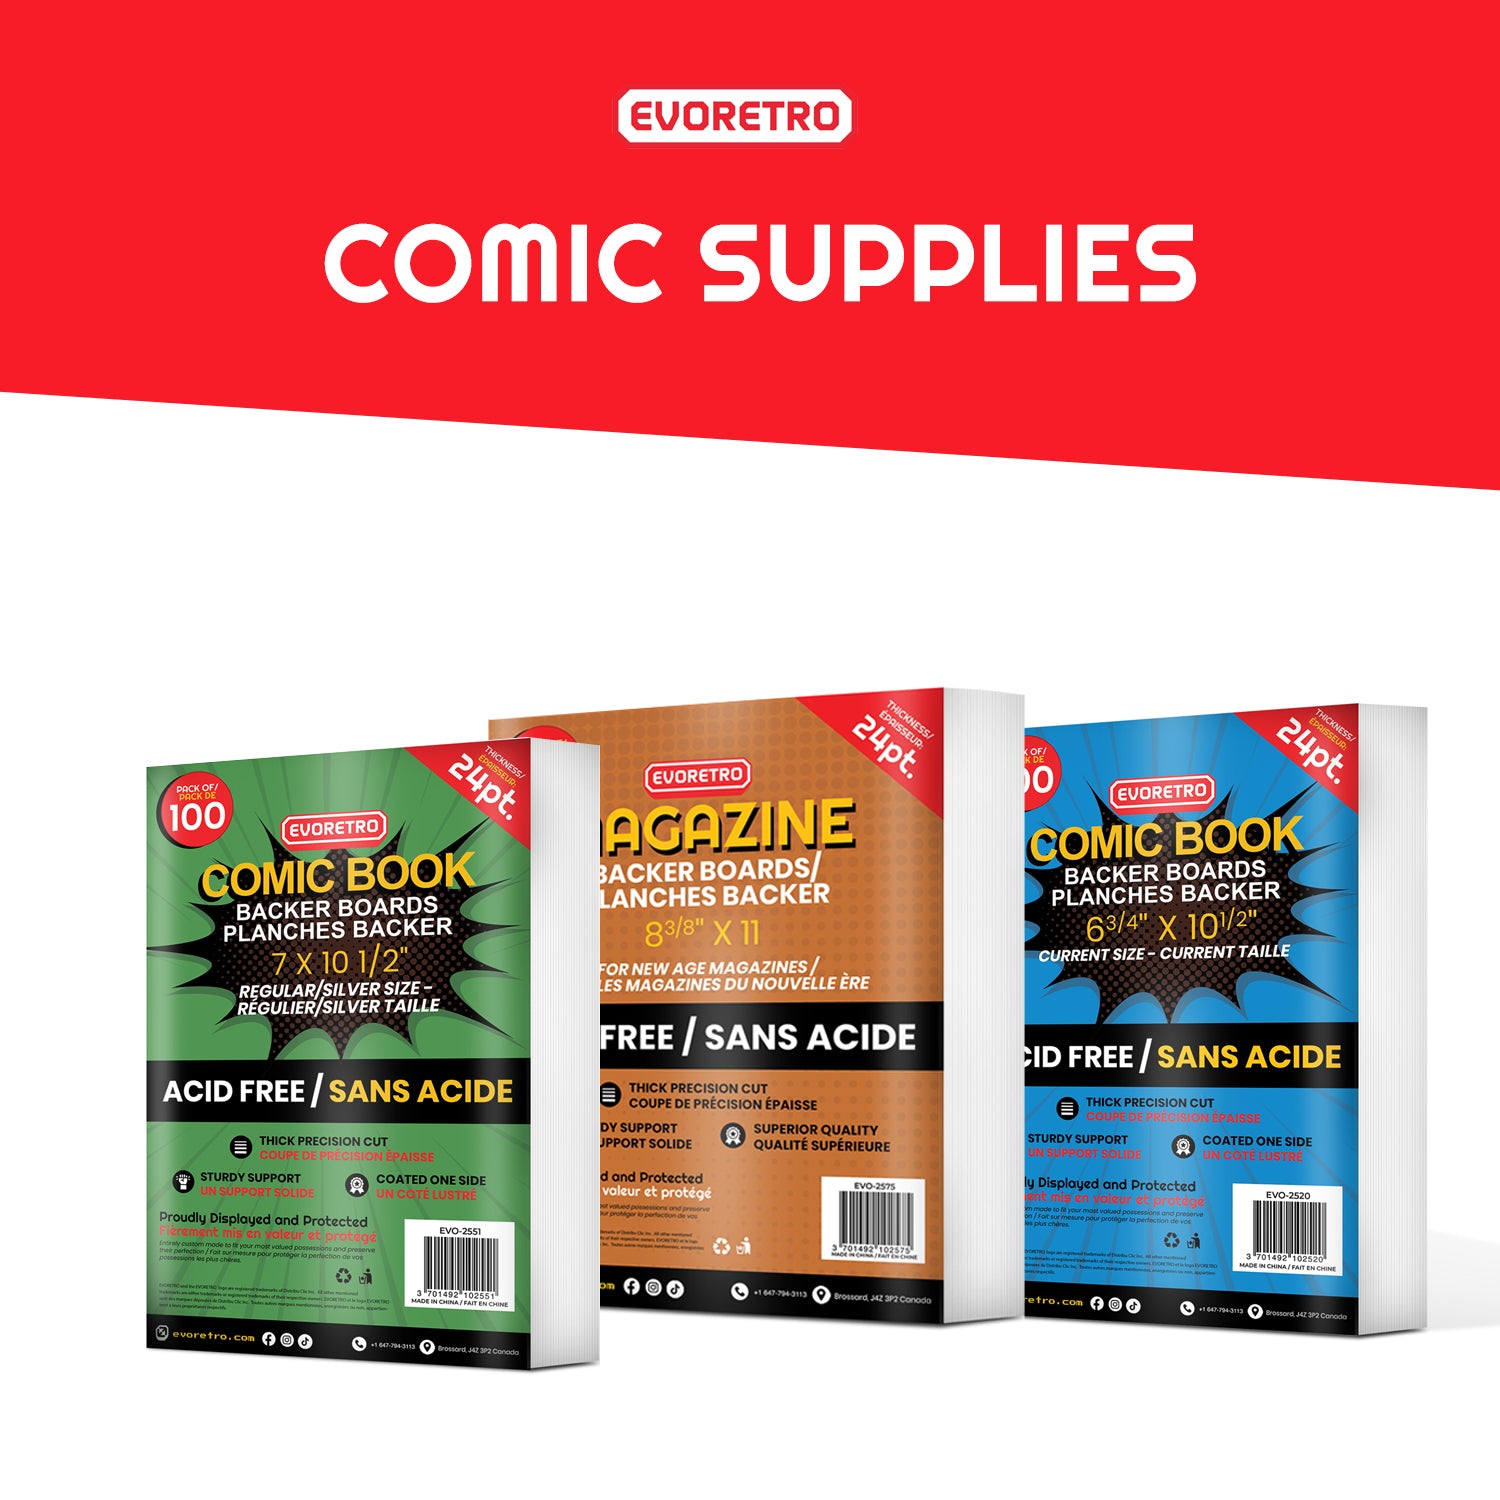 Comic Backing Boards – Online Coins and Collectables